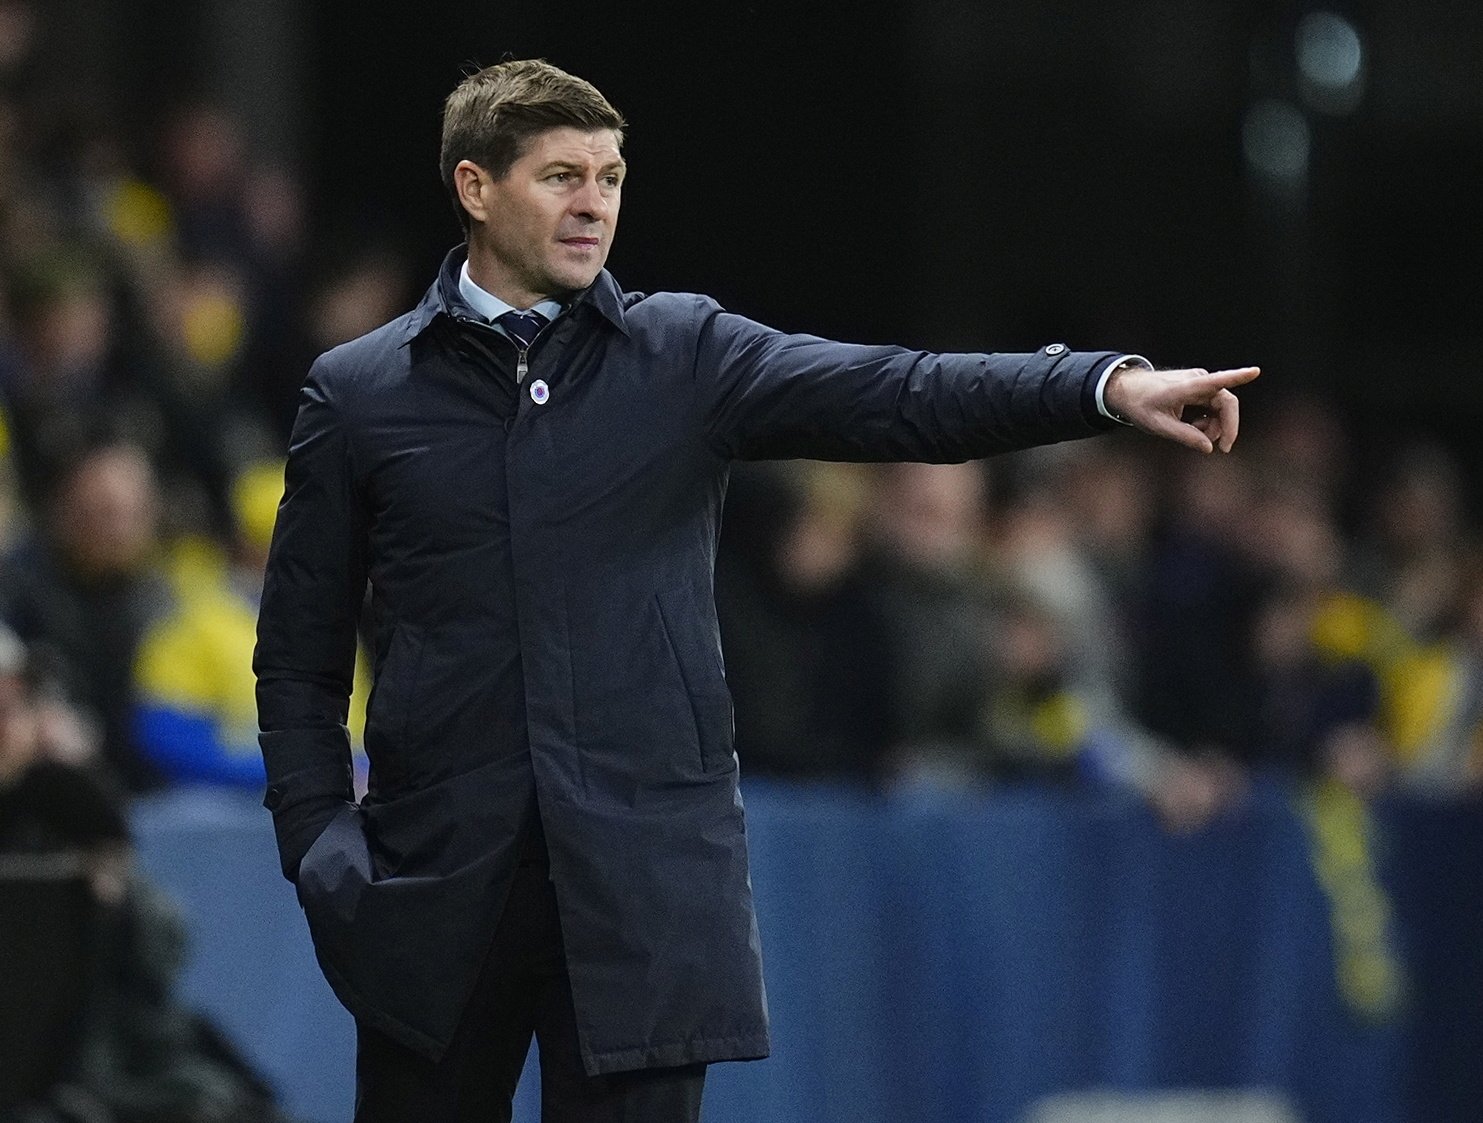 Then-Rangers manager Steven Gerrard gestures during a Europa League match against Brondby, Brondby, Denmark, Nov. 4, 2021.